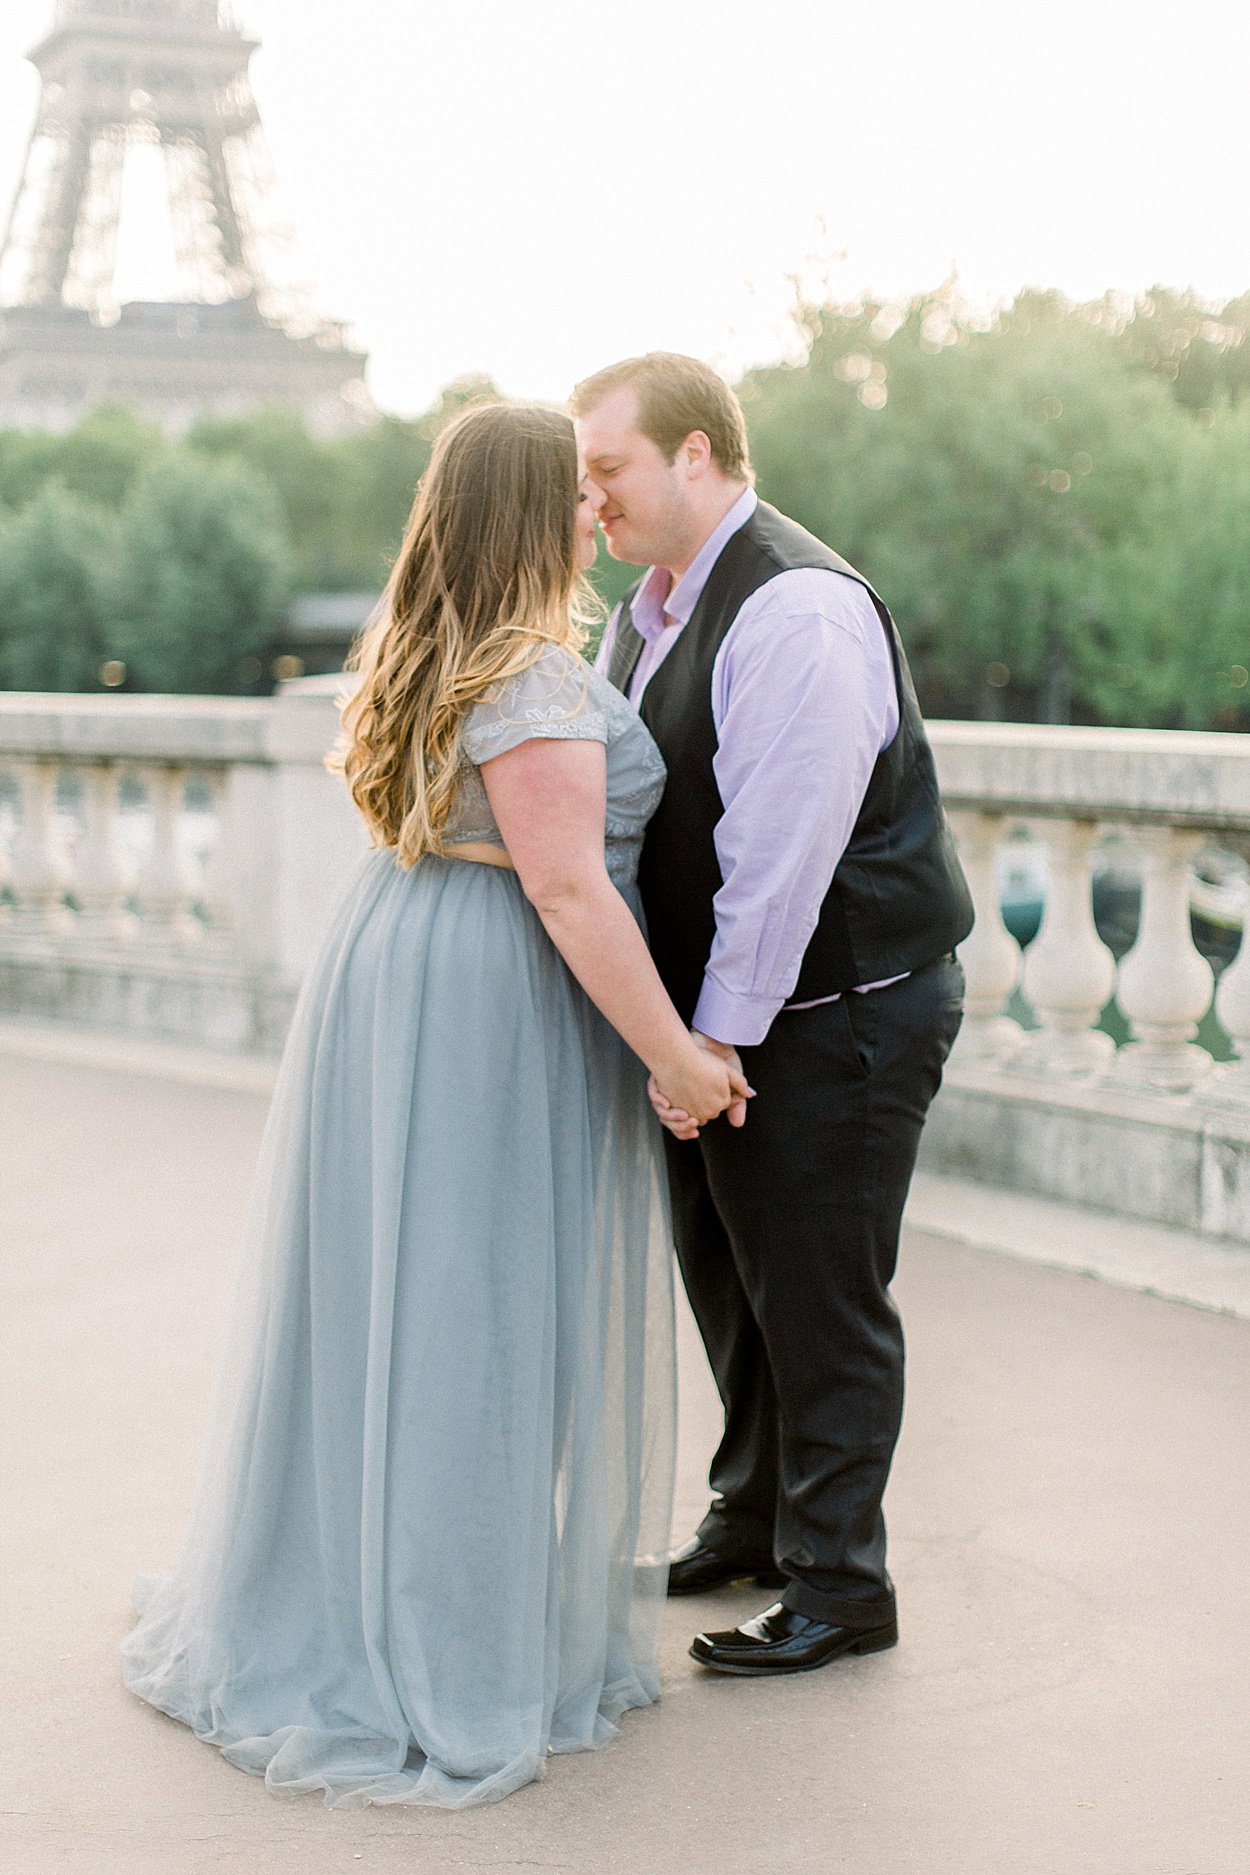 Paris engagement photo at the Eiffel Tower | by Abby Grace